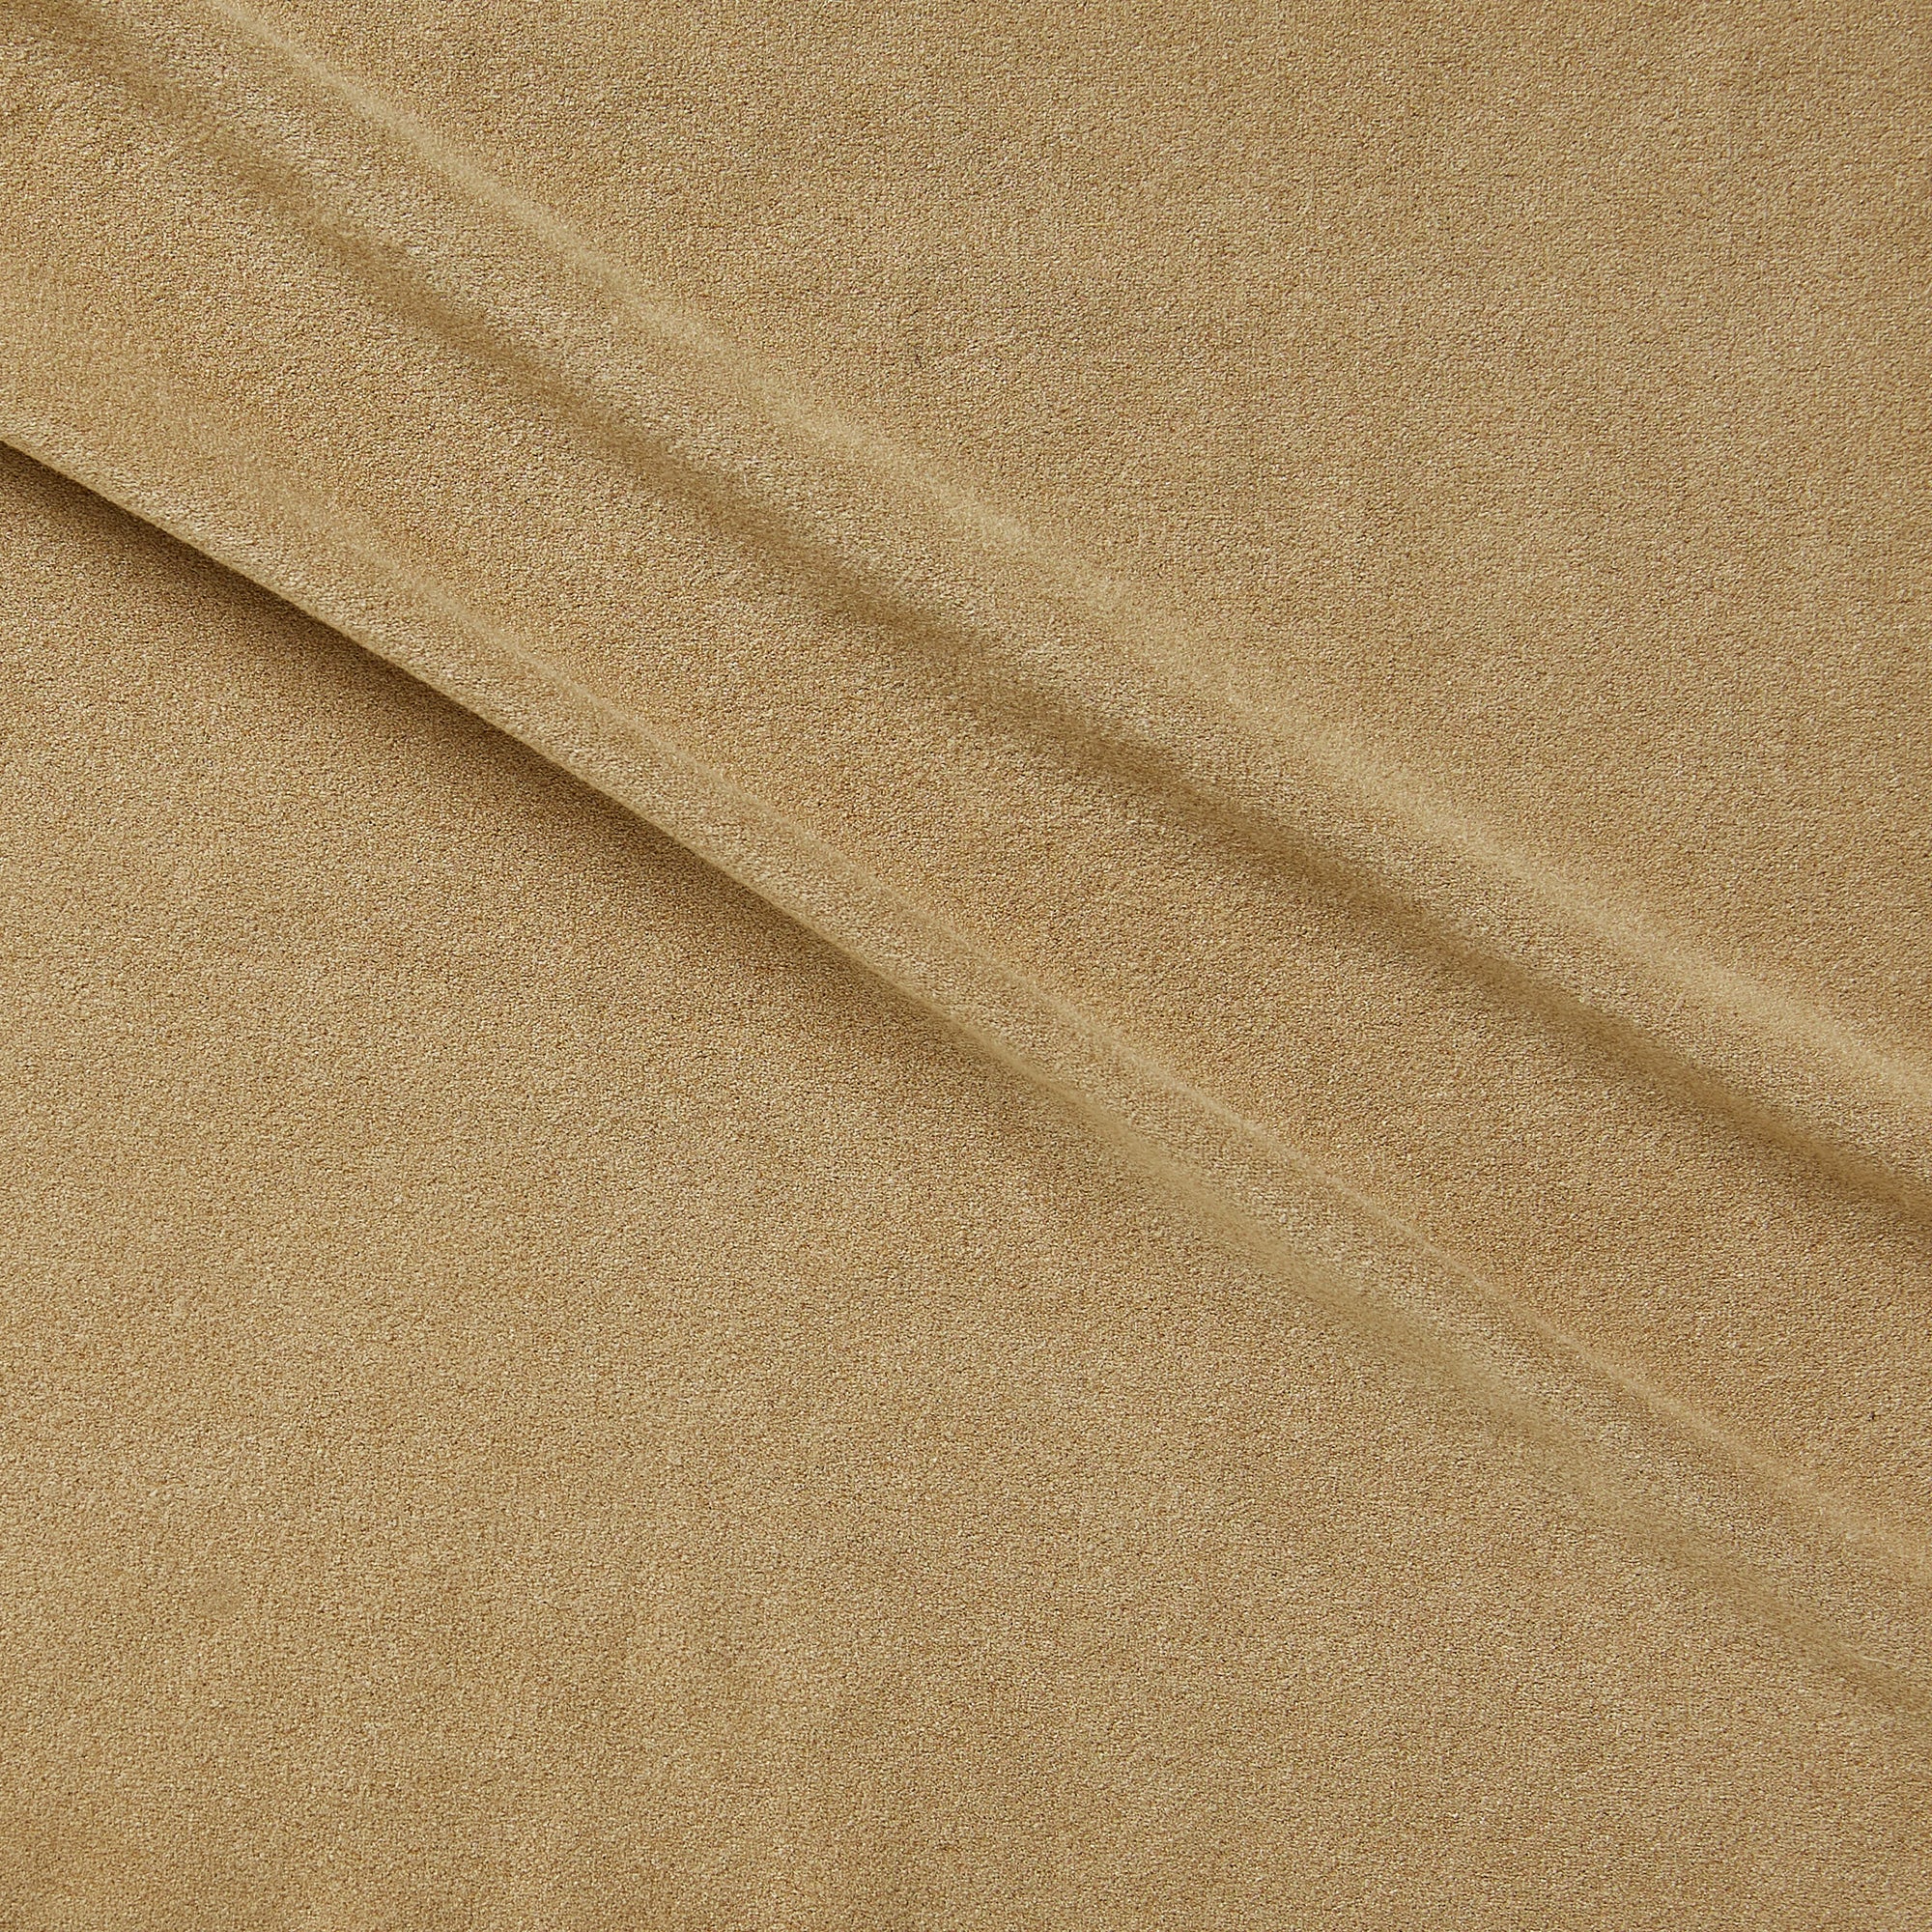 Illustrating super suede a chamois colored soft stretrch polyester vegan suede with spandex featuring good drape